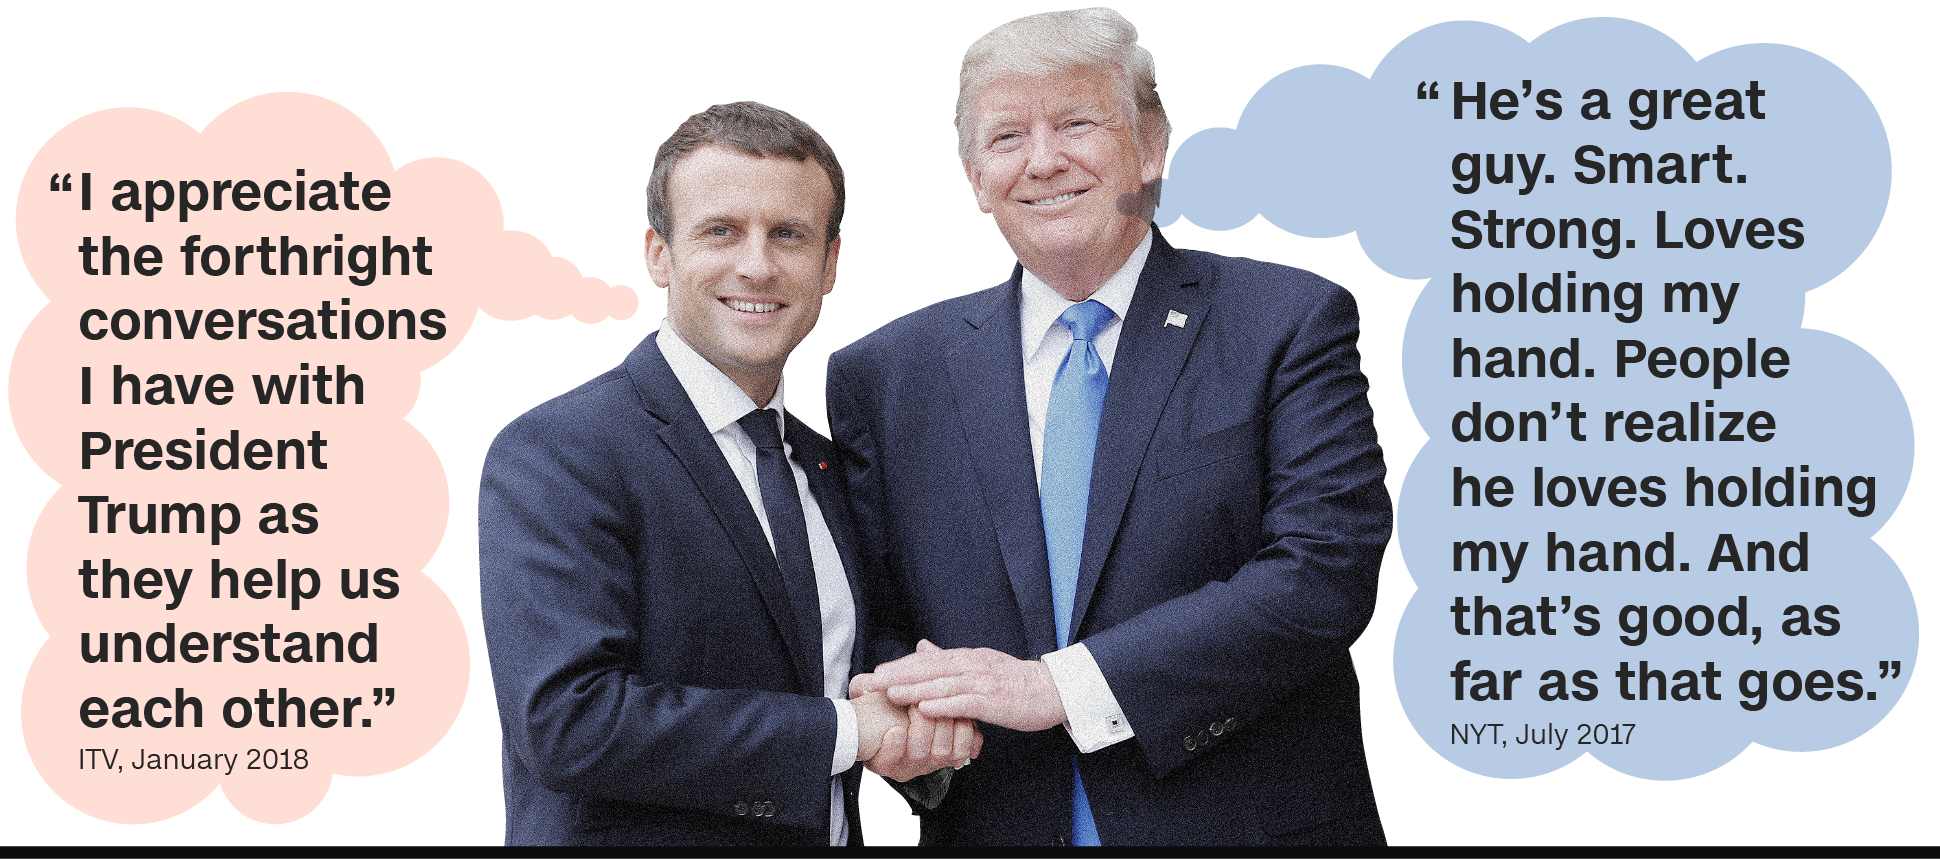 Macron to put 'bromance' with Trump to the test during US visit